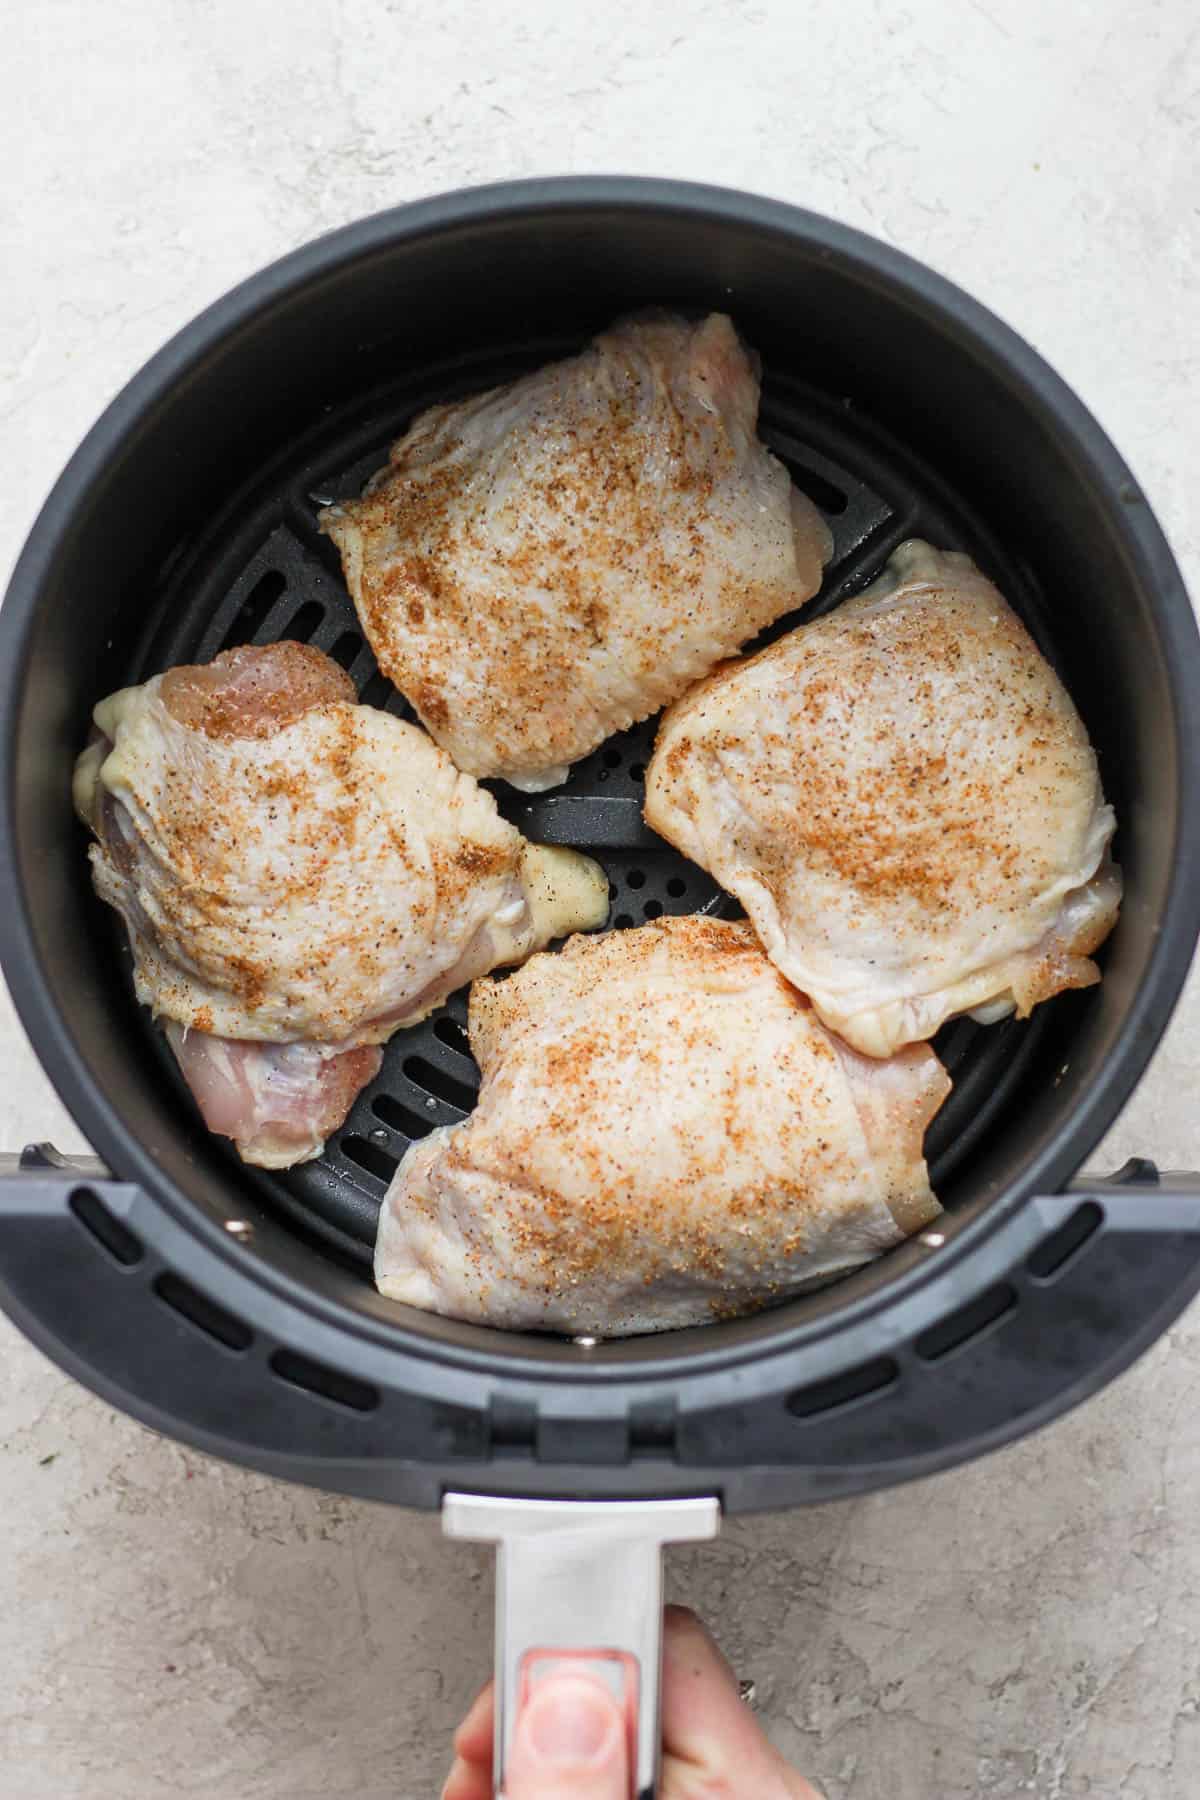 Seasoned chicken thighs in the air fryer basket before being cooked.